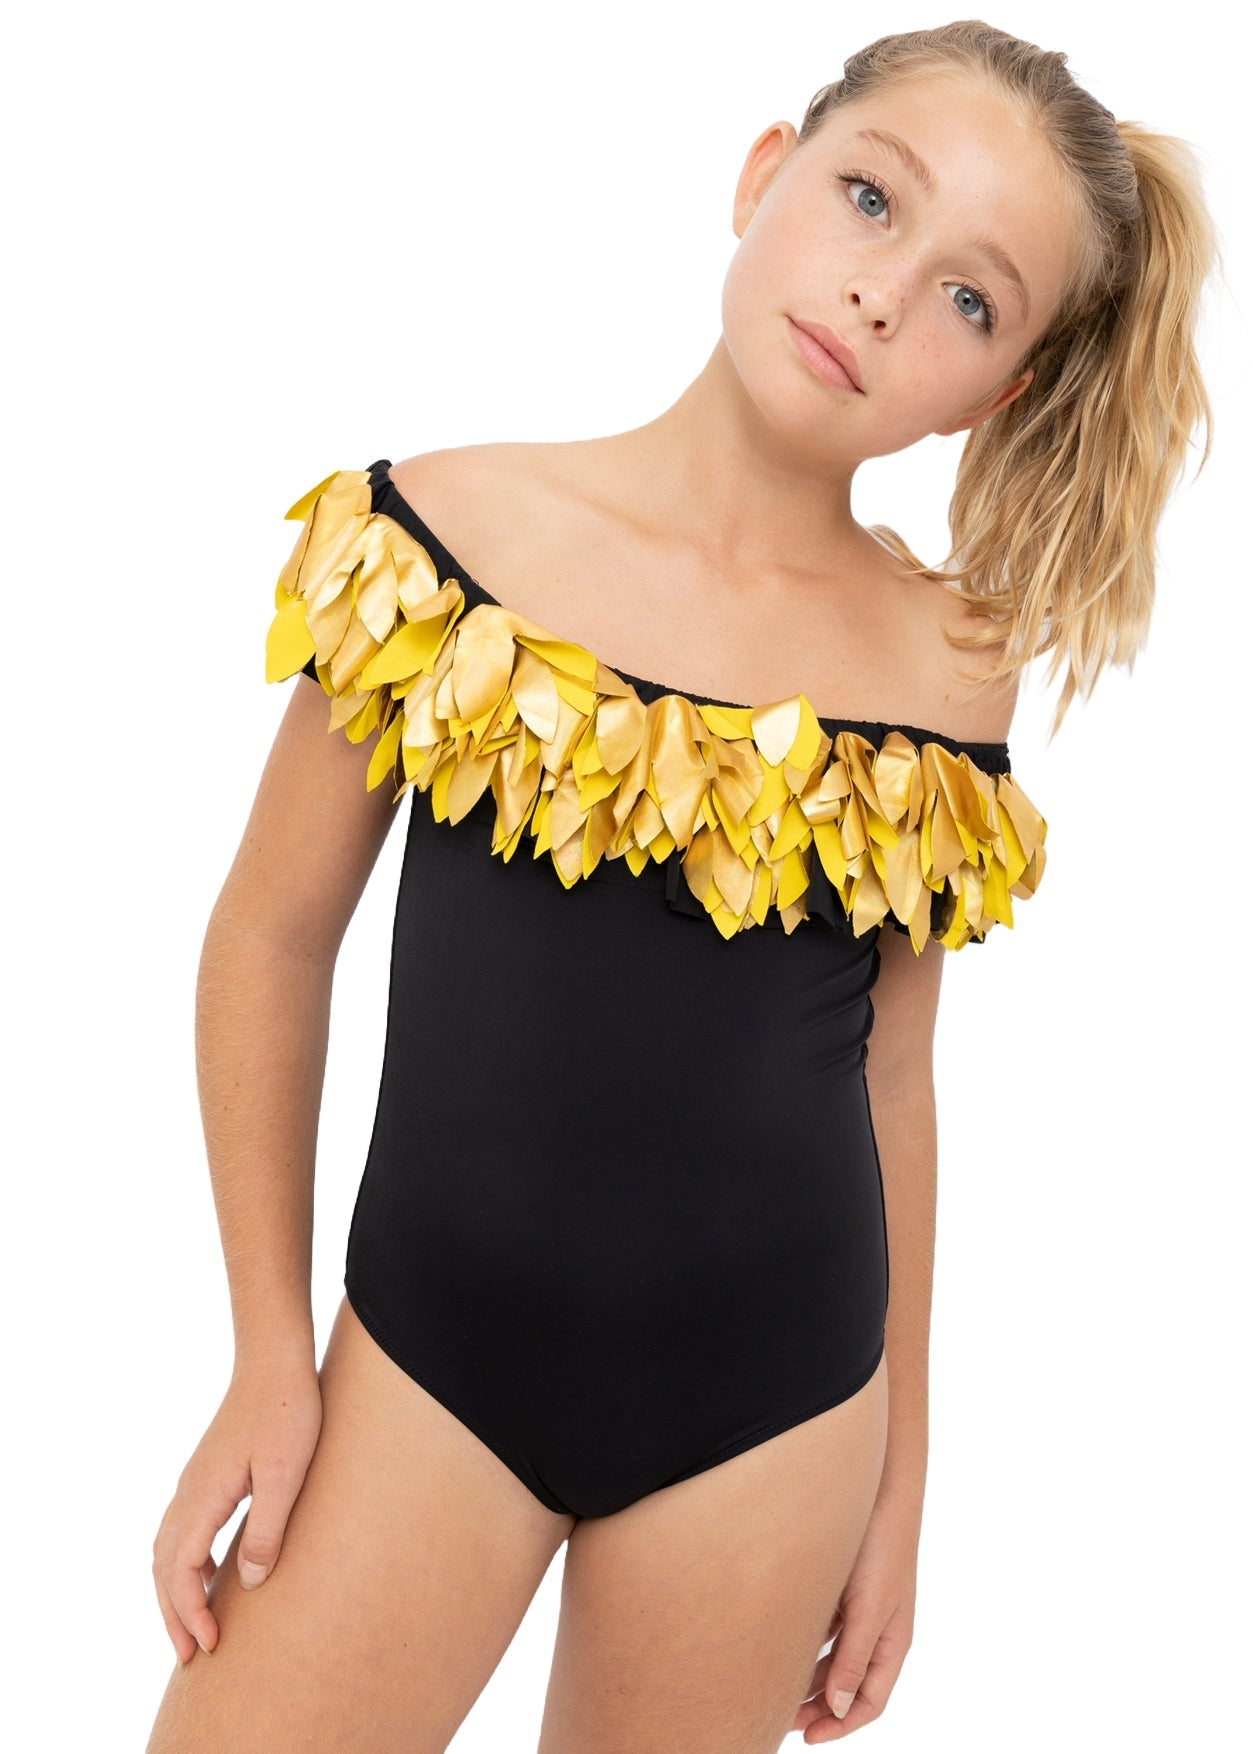 Black Swimsuit with Gold Petals